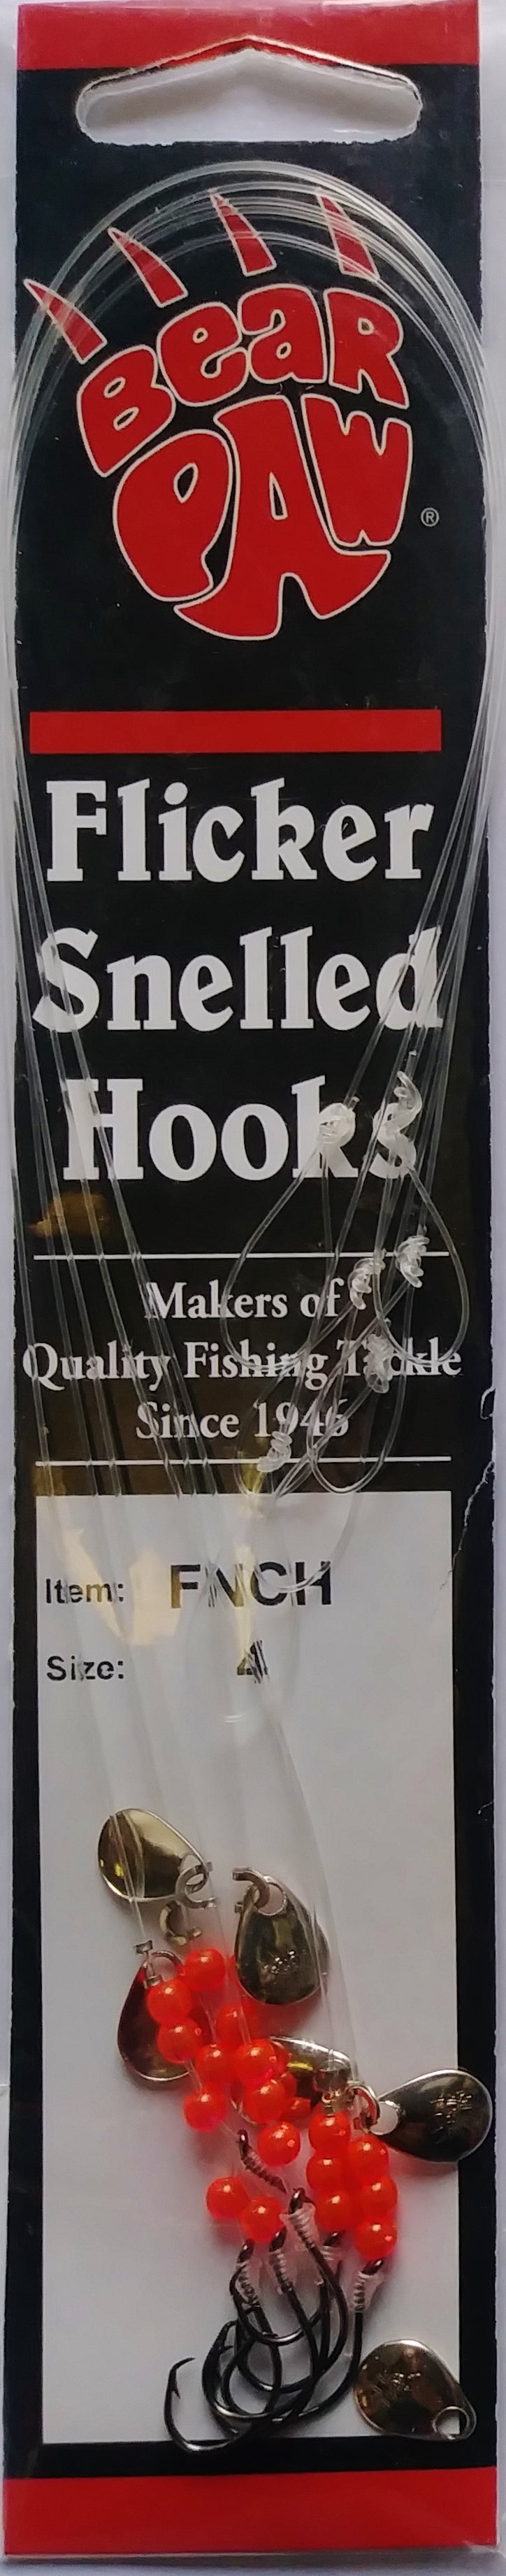 Bear Paw Flicker Snelled Hooks – Been There Caught That - Fishing Supply